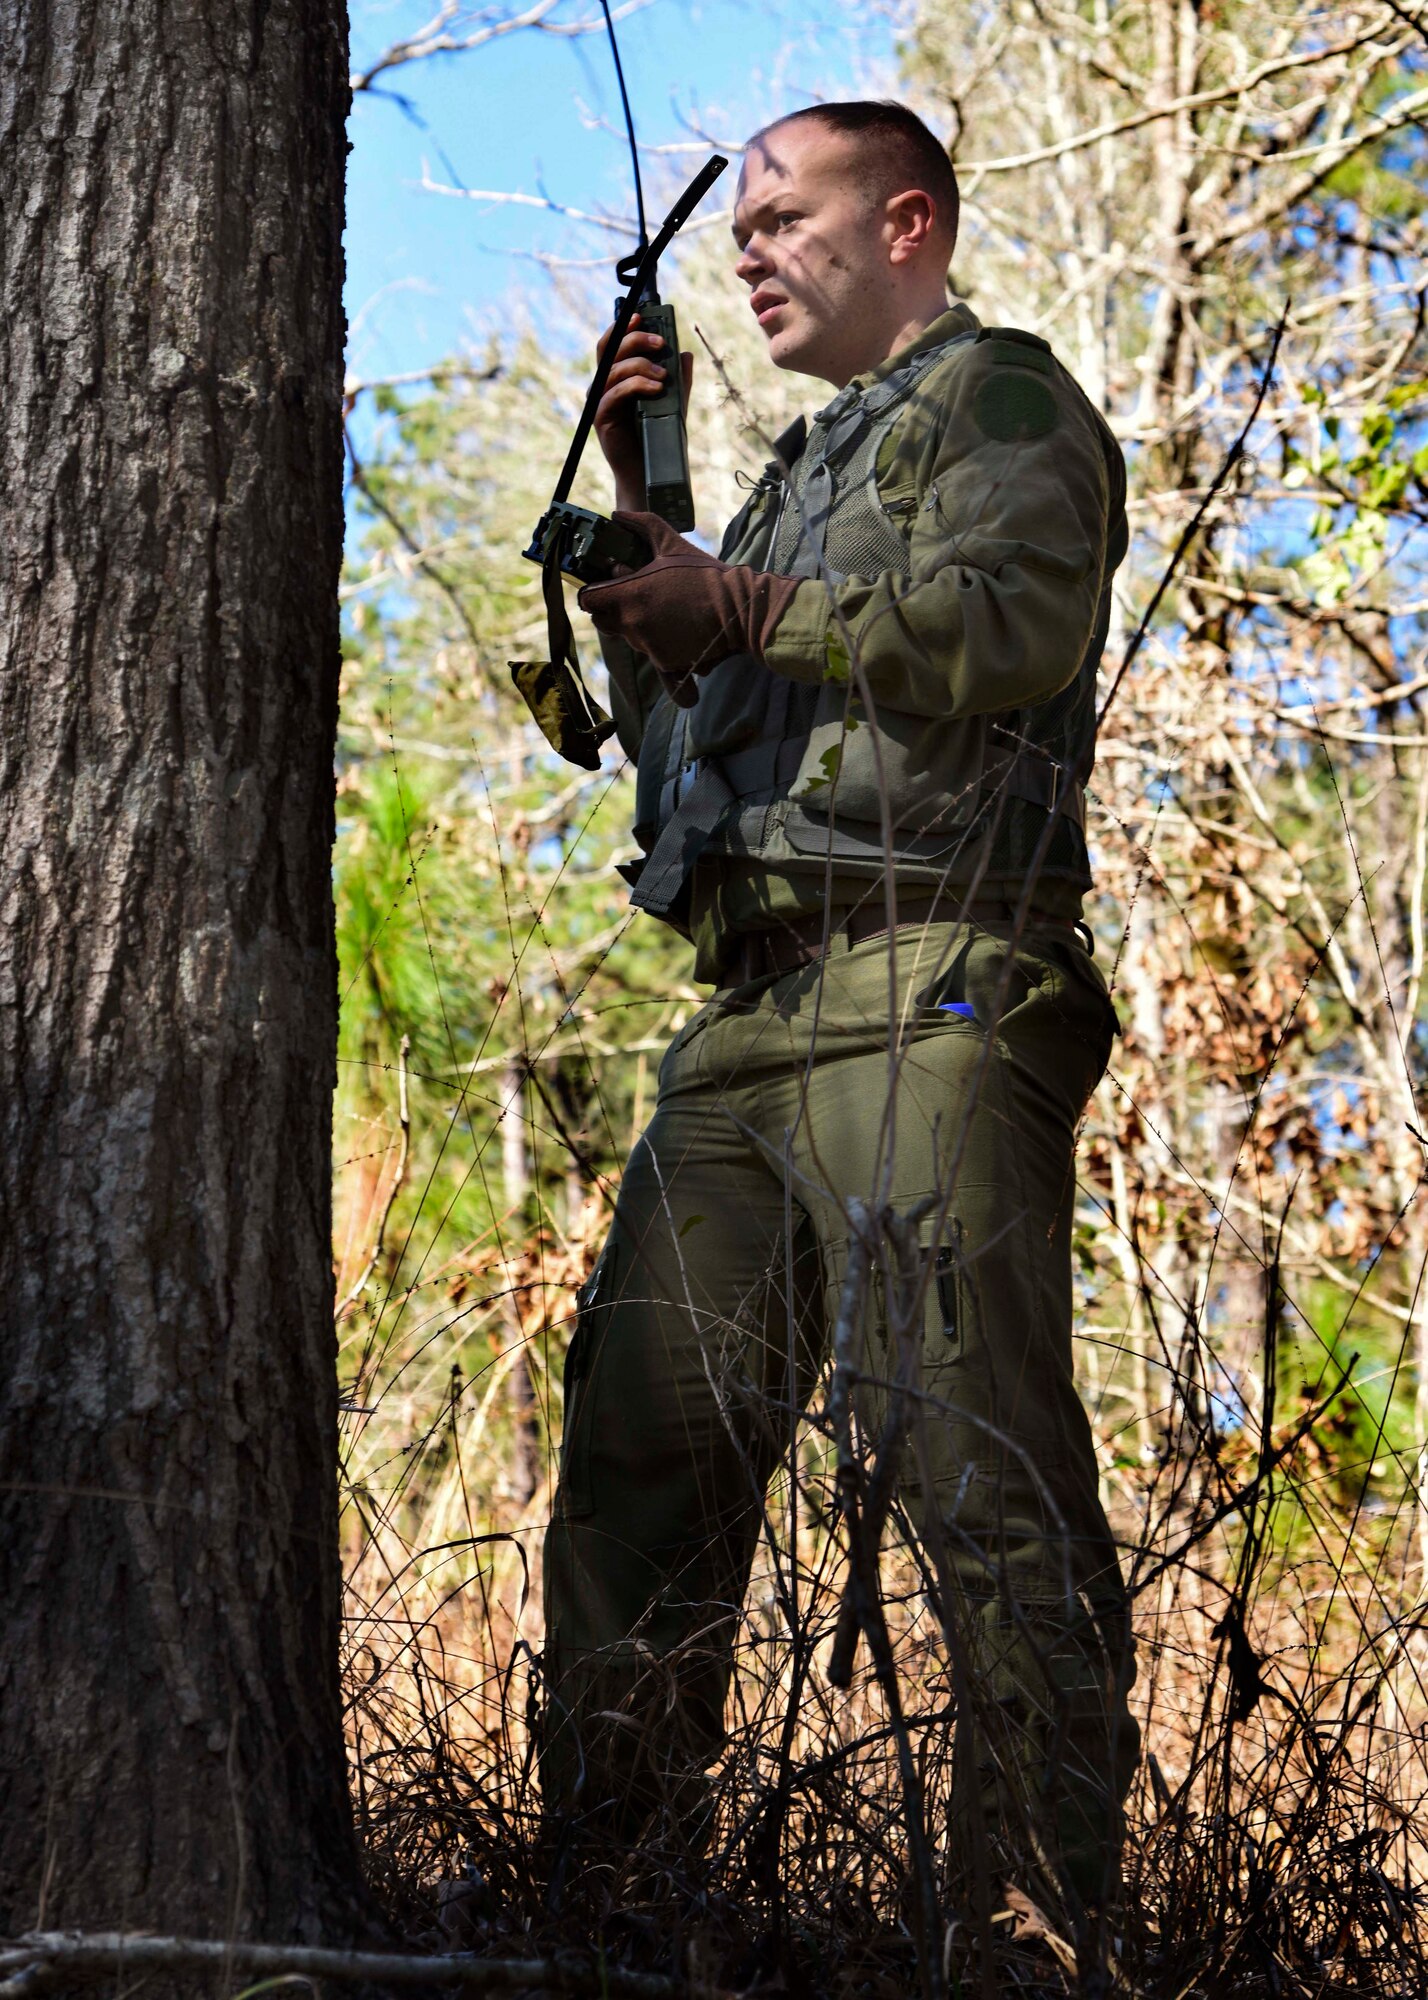 Royal Canadian Air Force Cpl. Teddy Lapkin, 436 Transport Squadron technical crewman, attempts to contact a C-130J during survival, evasion, resistance and escape training Feb. 10, 2017, near Alexandria, La. SERE training is conducted to aid aircrew in survival techniques such as building shelter, land navigation and procuring water to evade the enemy until they can be rescued. (U.S. Air Force photo by Senior Airman Stephanie Serrano)